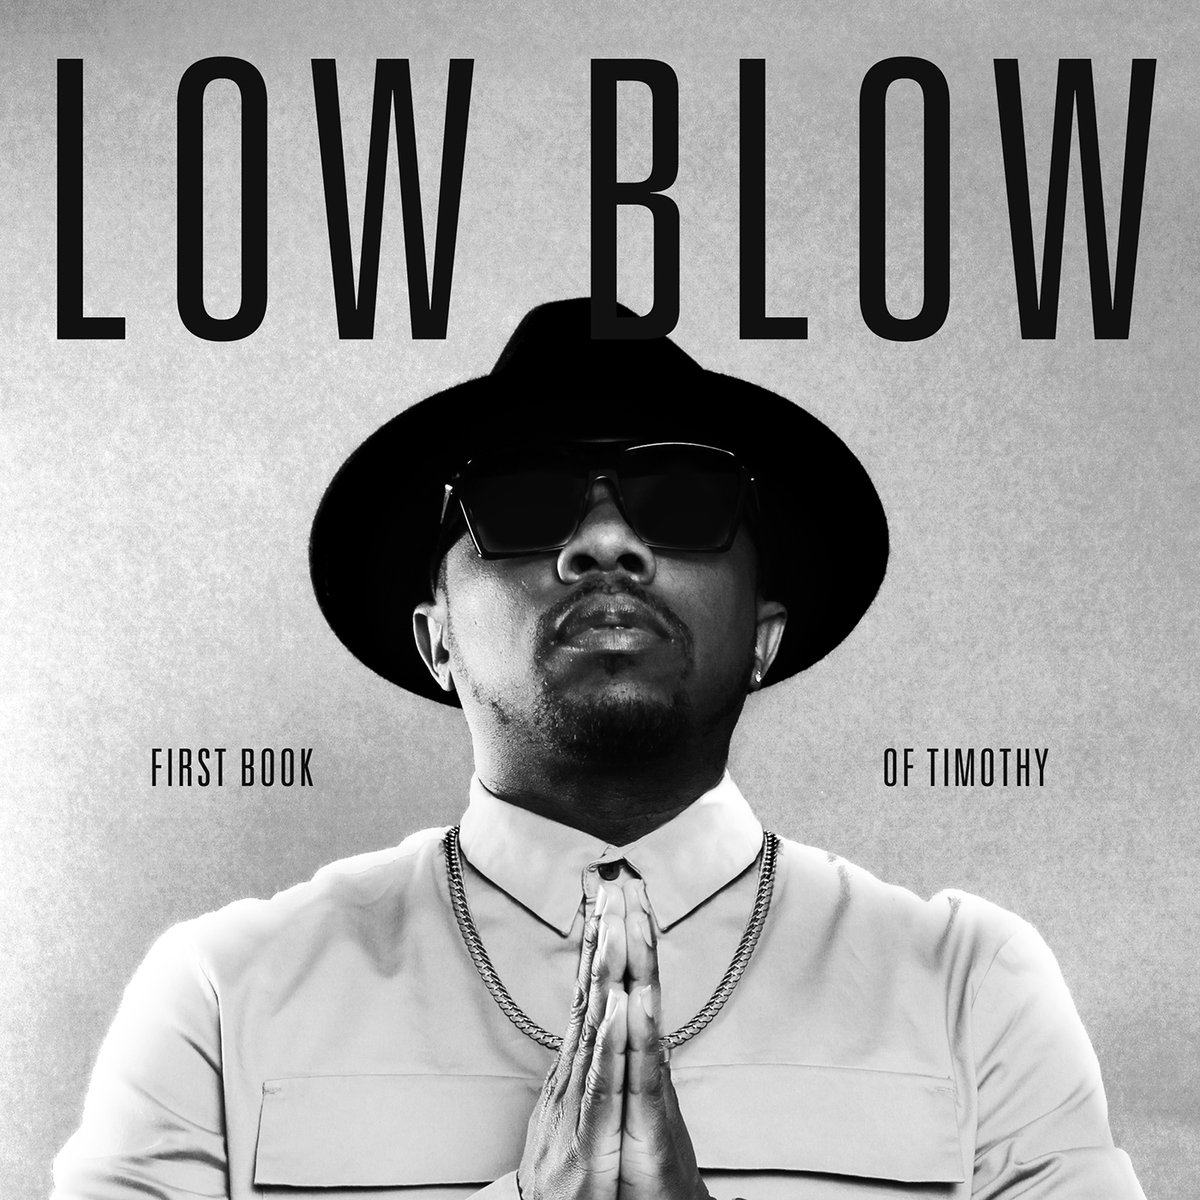 LOW BLOW (HIPHOP) / FIRST BOOK OF TIMOTHY (GOLD VINYL) "LP"